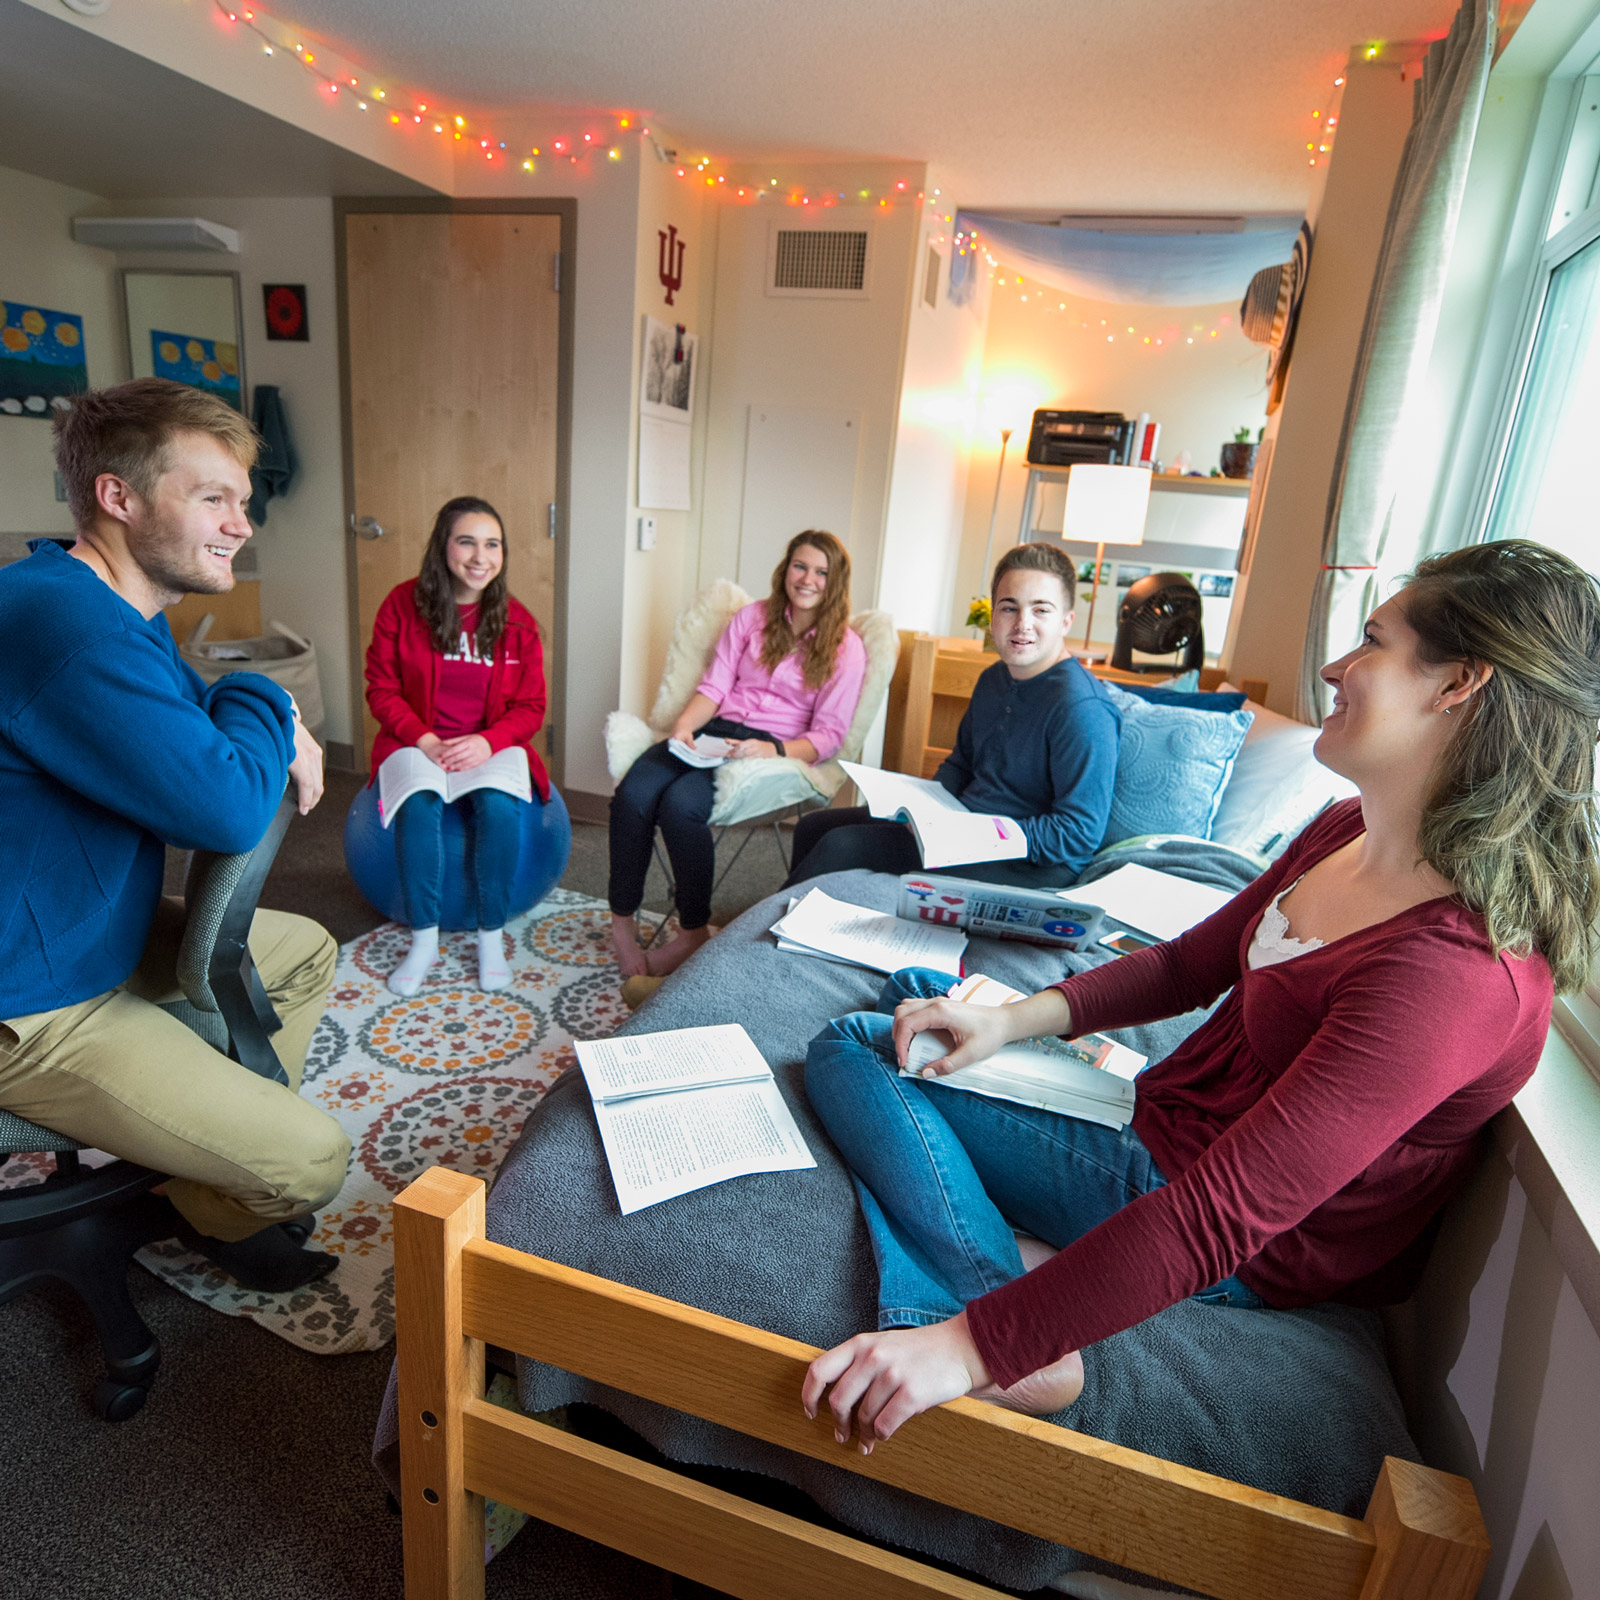 Students have a conversation in a dorm room.